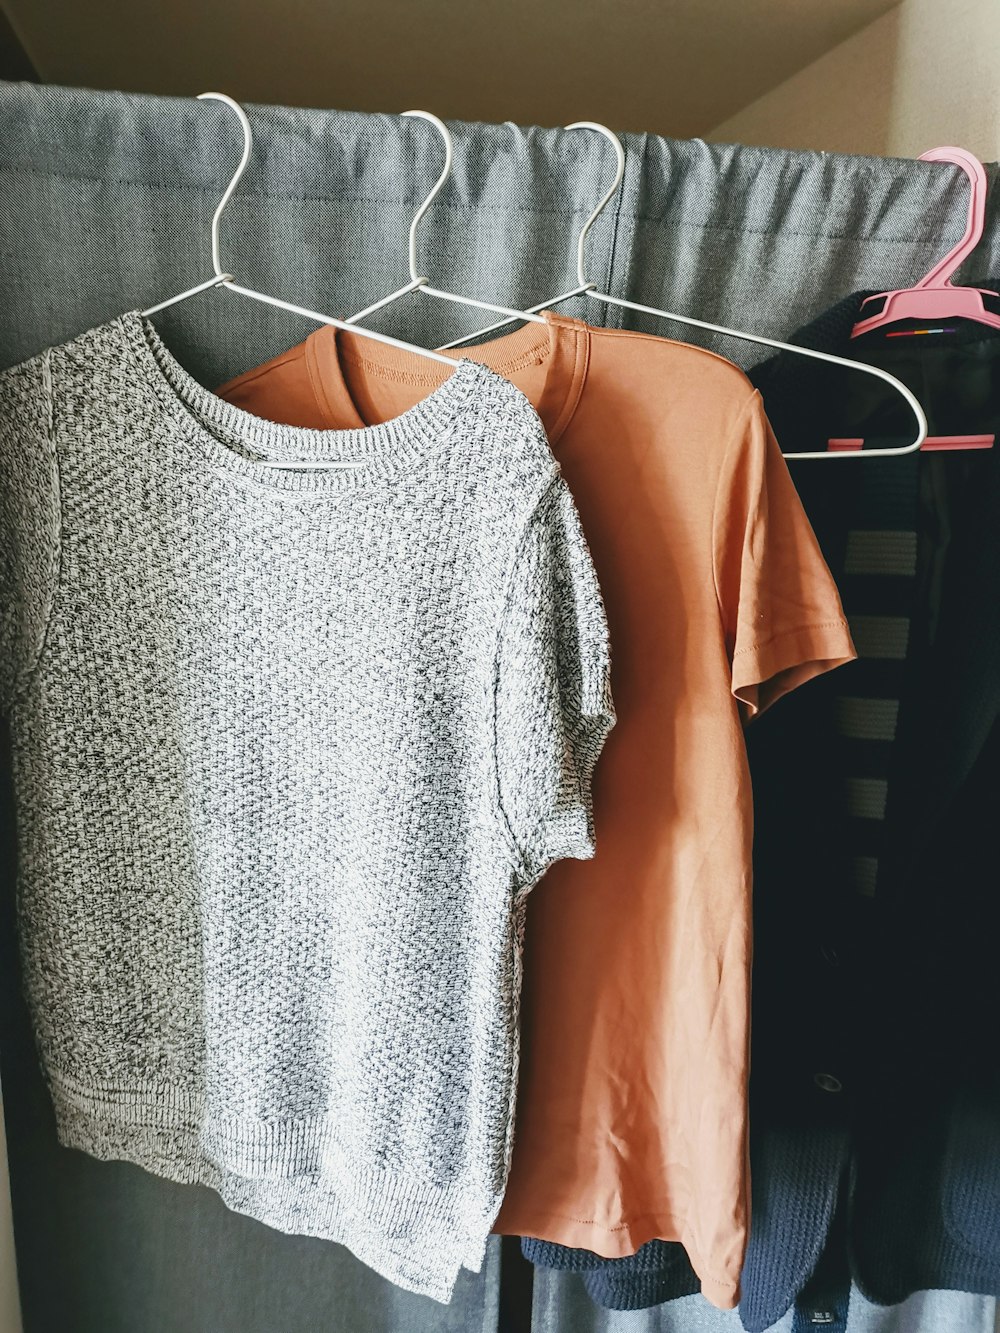 three assorted-color shirts